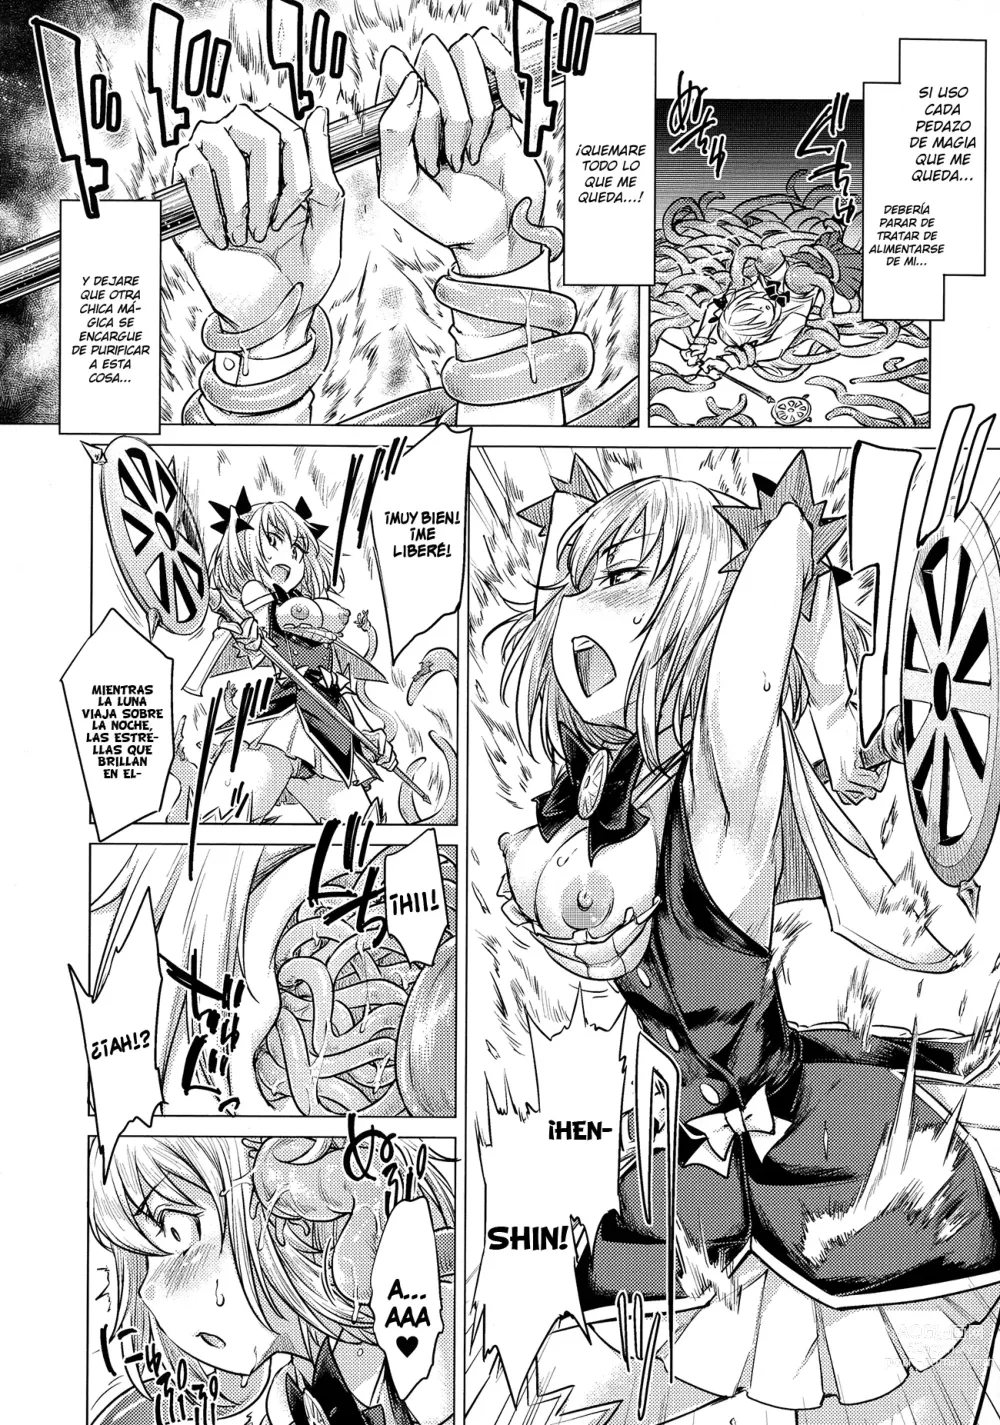 Page 12 of manga Tentacle Maiden